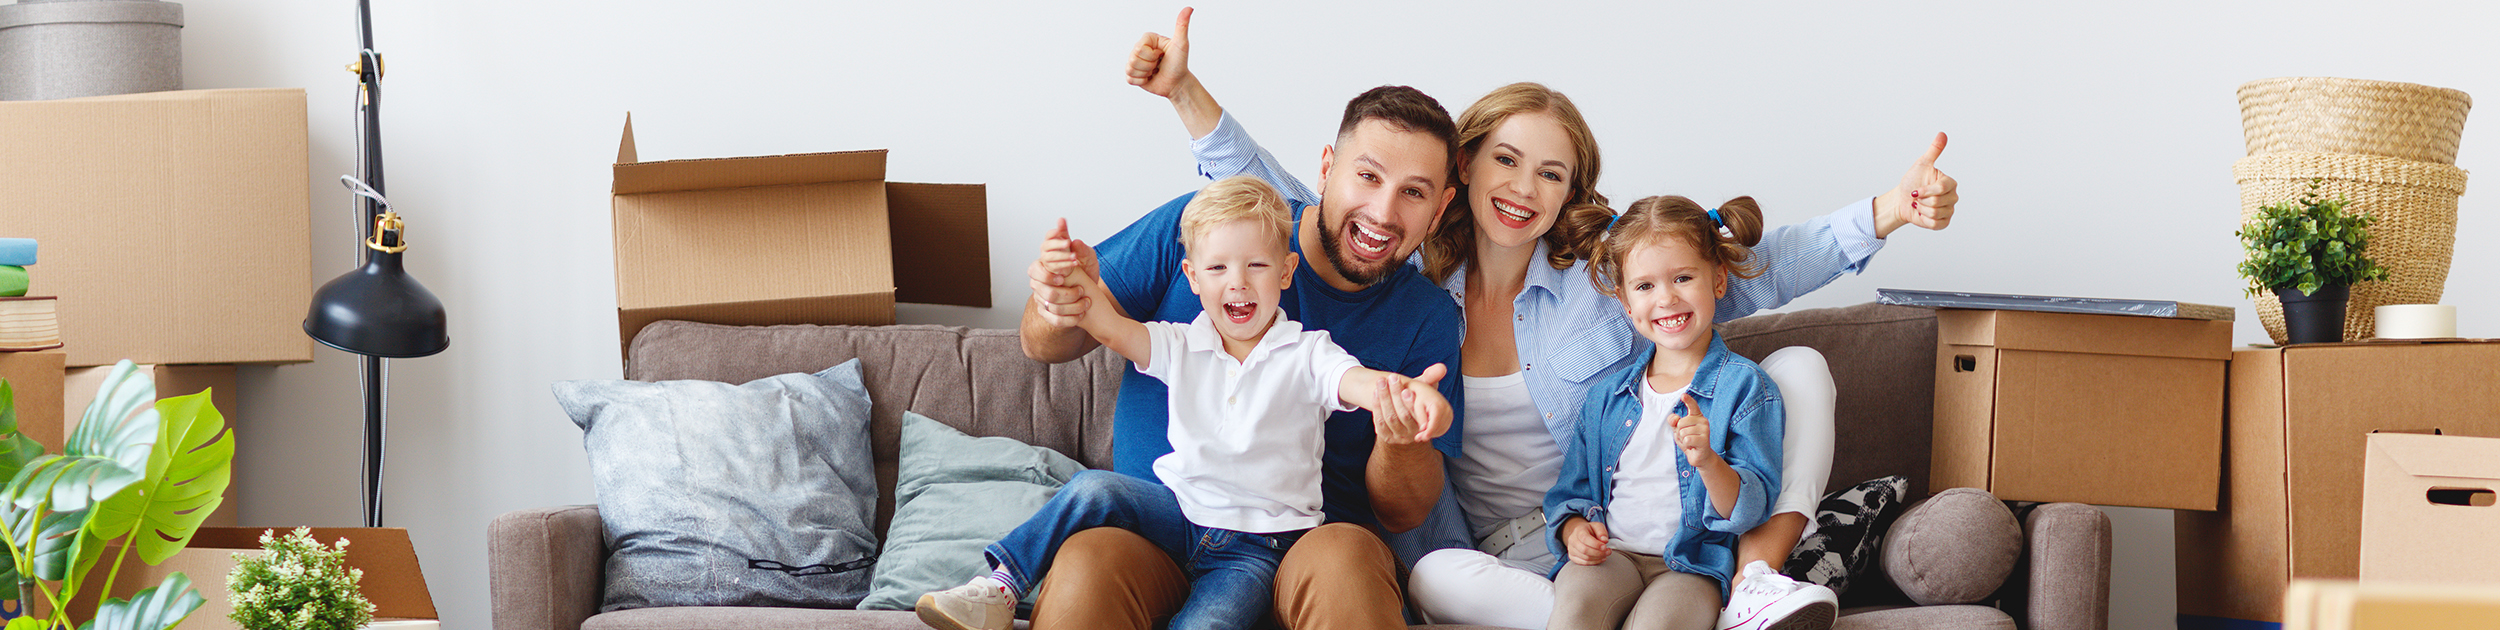 man, woman and two children with big smiles and doing thumbs up while sitting on a couch surrounded by moving boxes